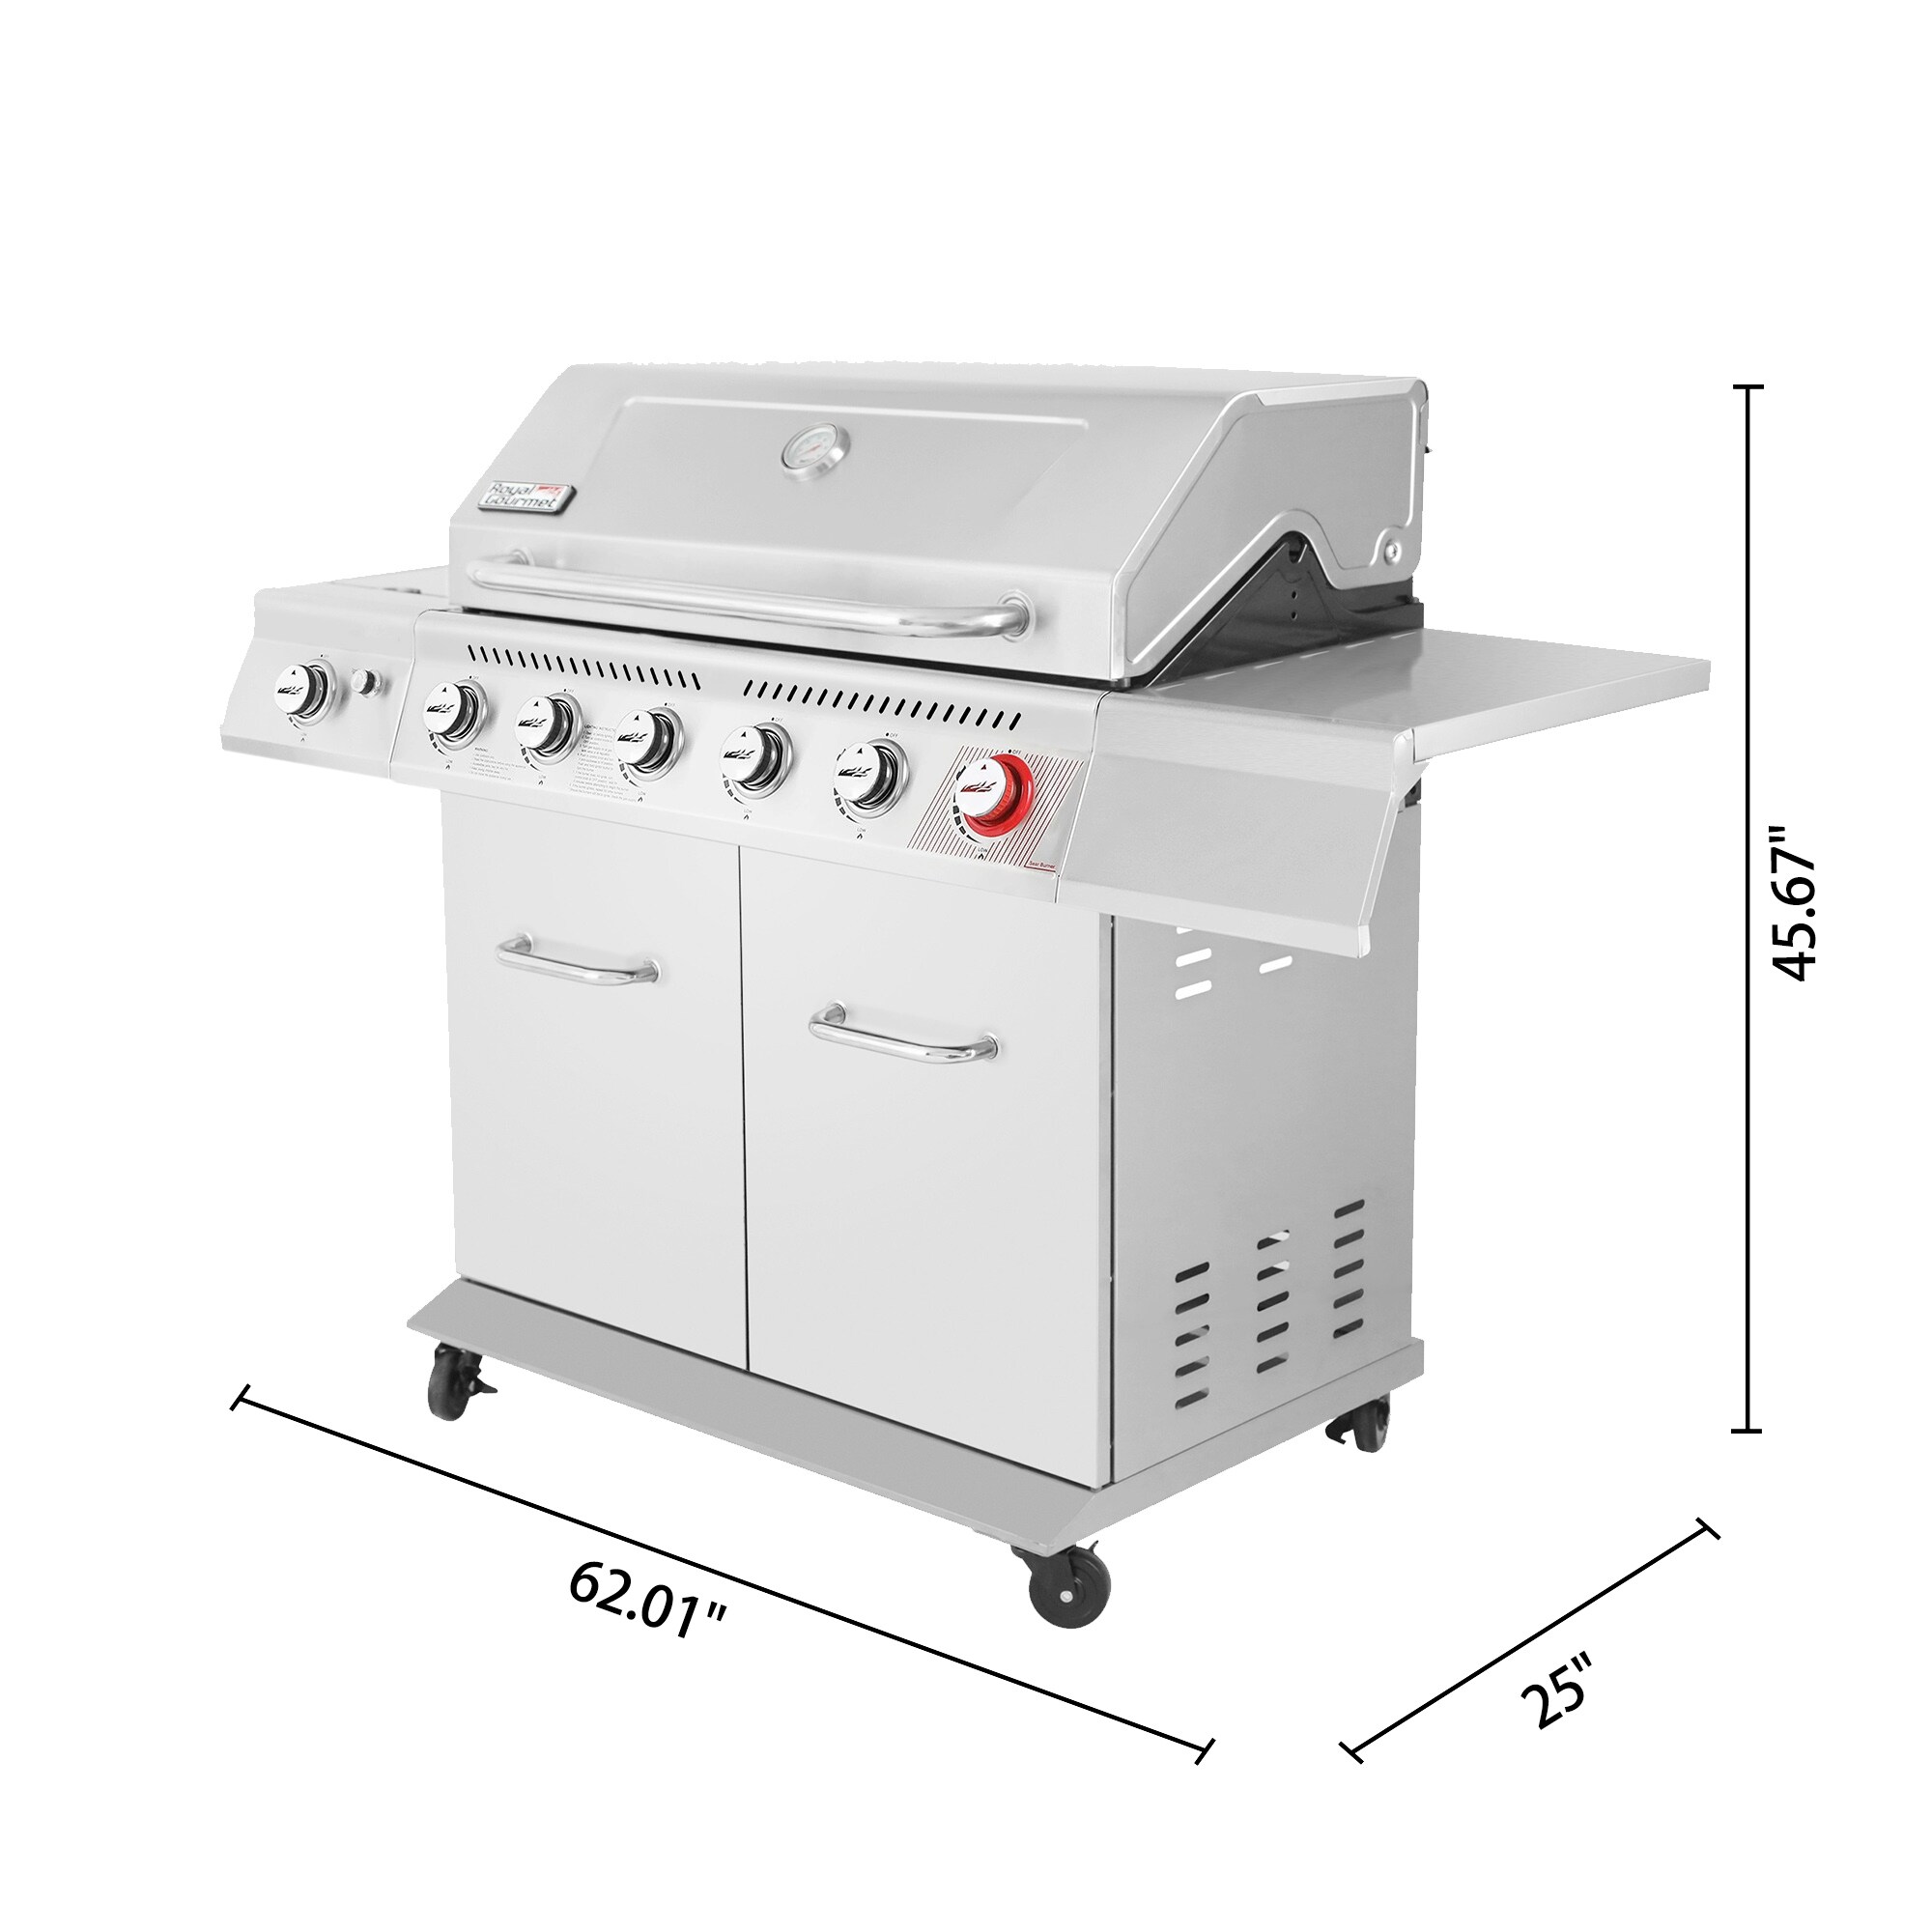 Gas Burner, - Royal Sale Sear Premier On Side BBQ Bath Beyond Gourmet 36898562 - - Grill, with Stainless Steel Silver & Grill and Burner 6-Burner Bed